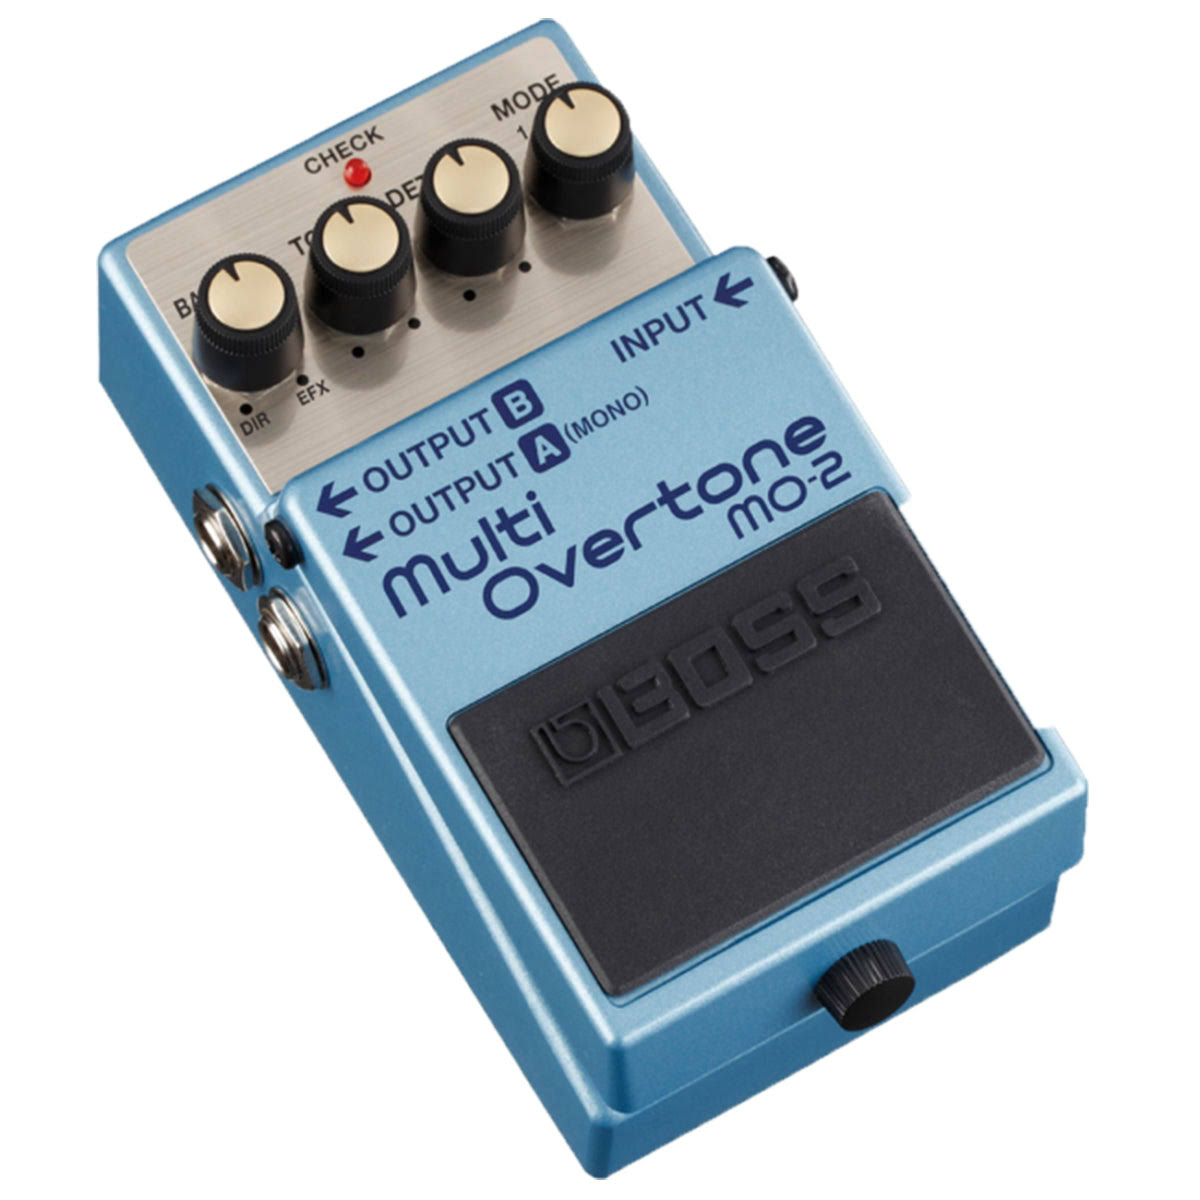 Boss Mo-2 Multi Overtone Guitar Effects Pedal - Blue